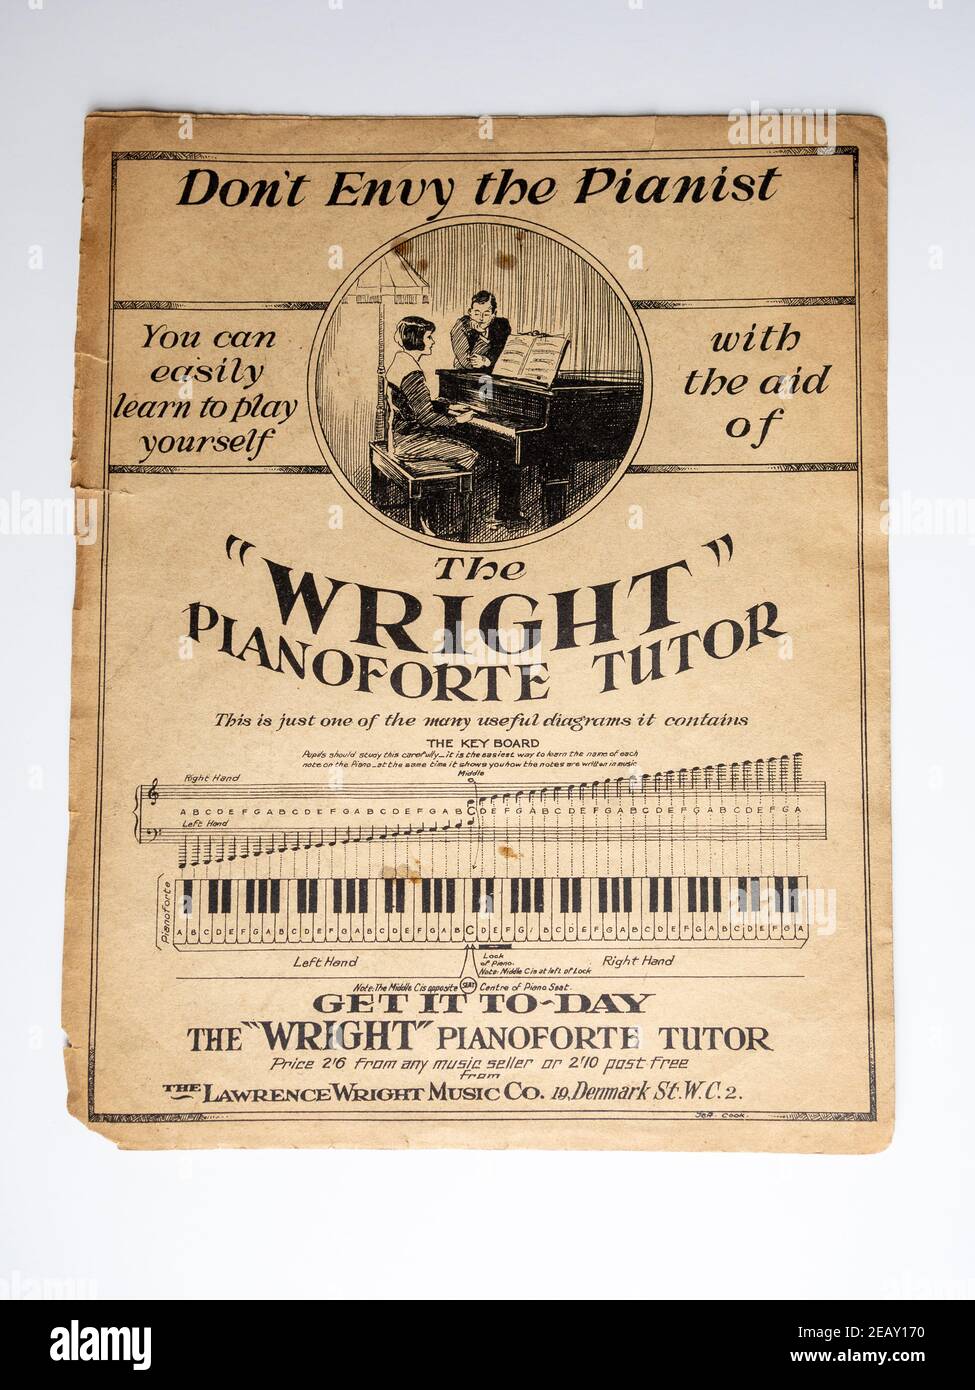 Stock photo of vintage sheet music  found in a UK junk shop; advert on the reverse for The Wright Pianoforte Tutor. Stock Photo